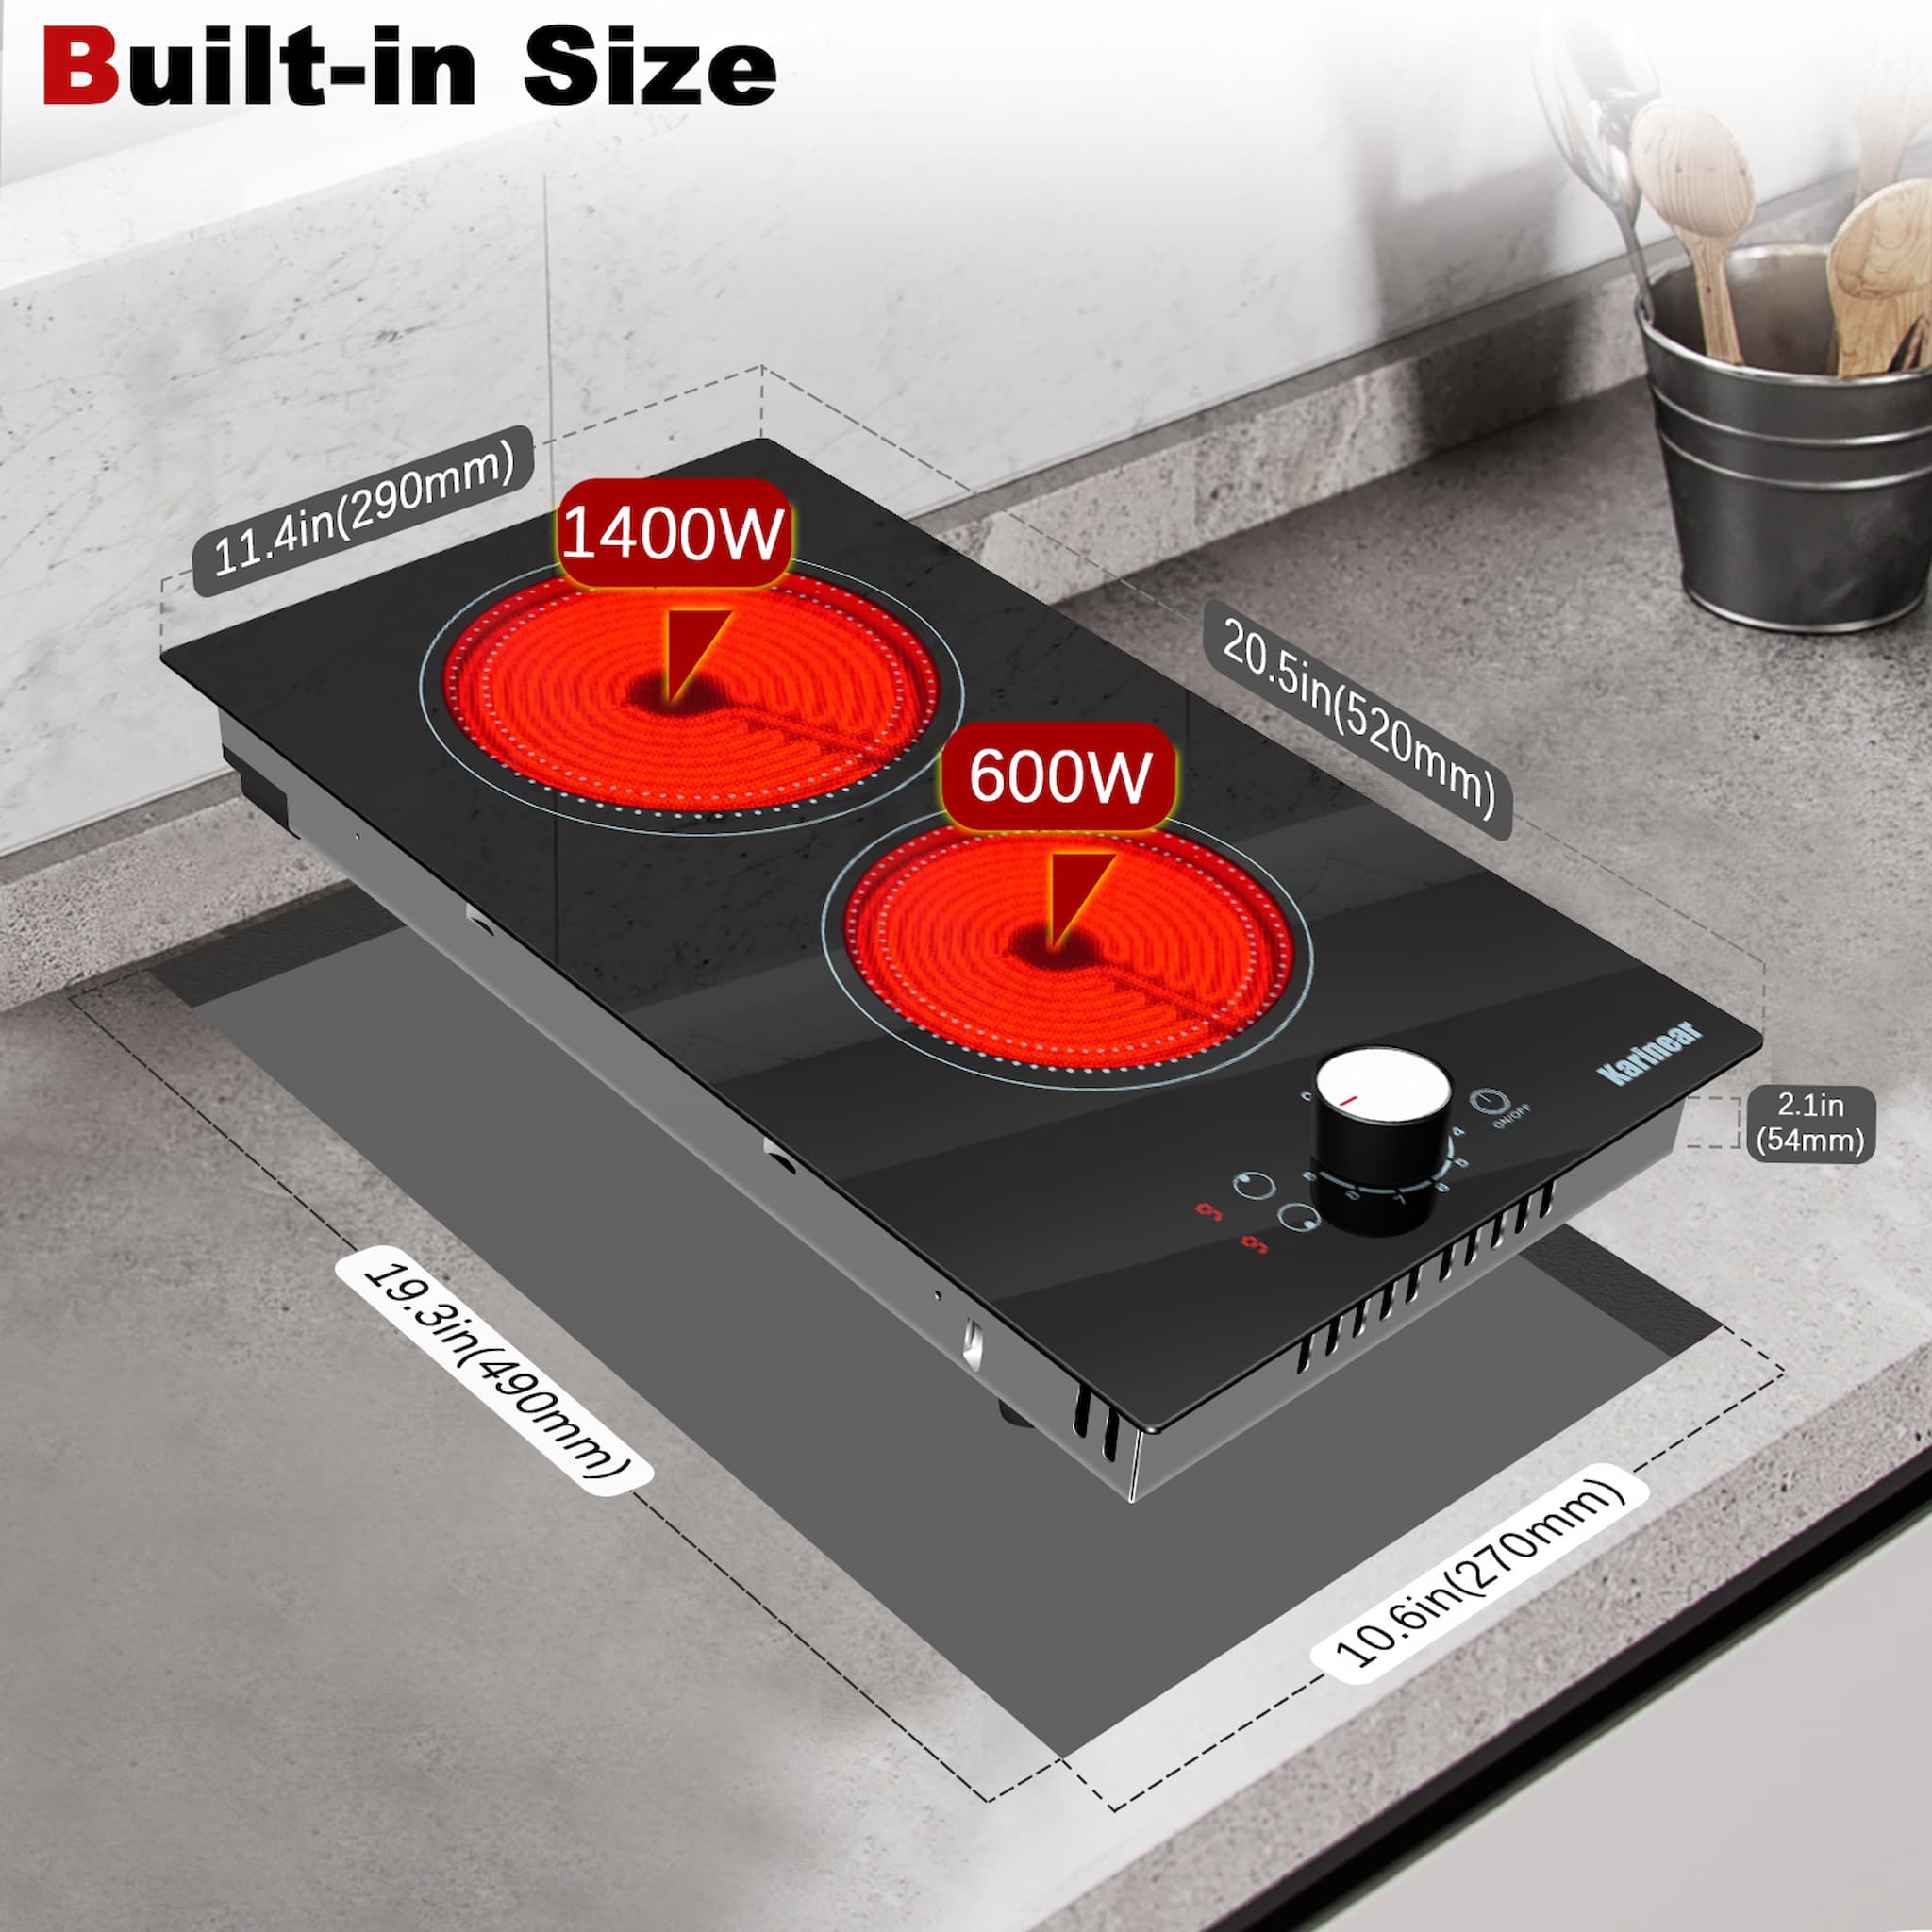 Are you still struggling to find the perfect electric ceramic cooktop? Then I have to introduce you to our portable, efficient, stylish and safe 12 Inch Portable Electric Stove Top, that is sure to be your dream stove!